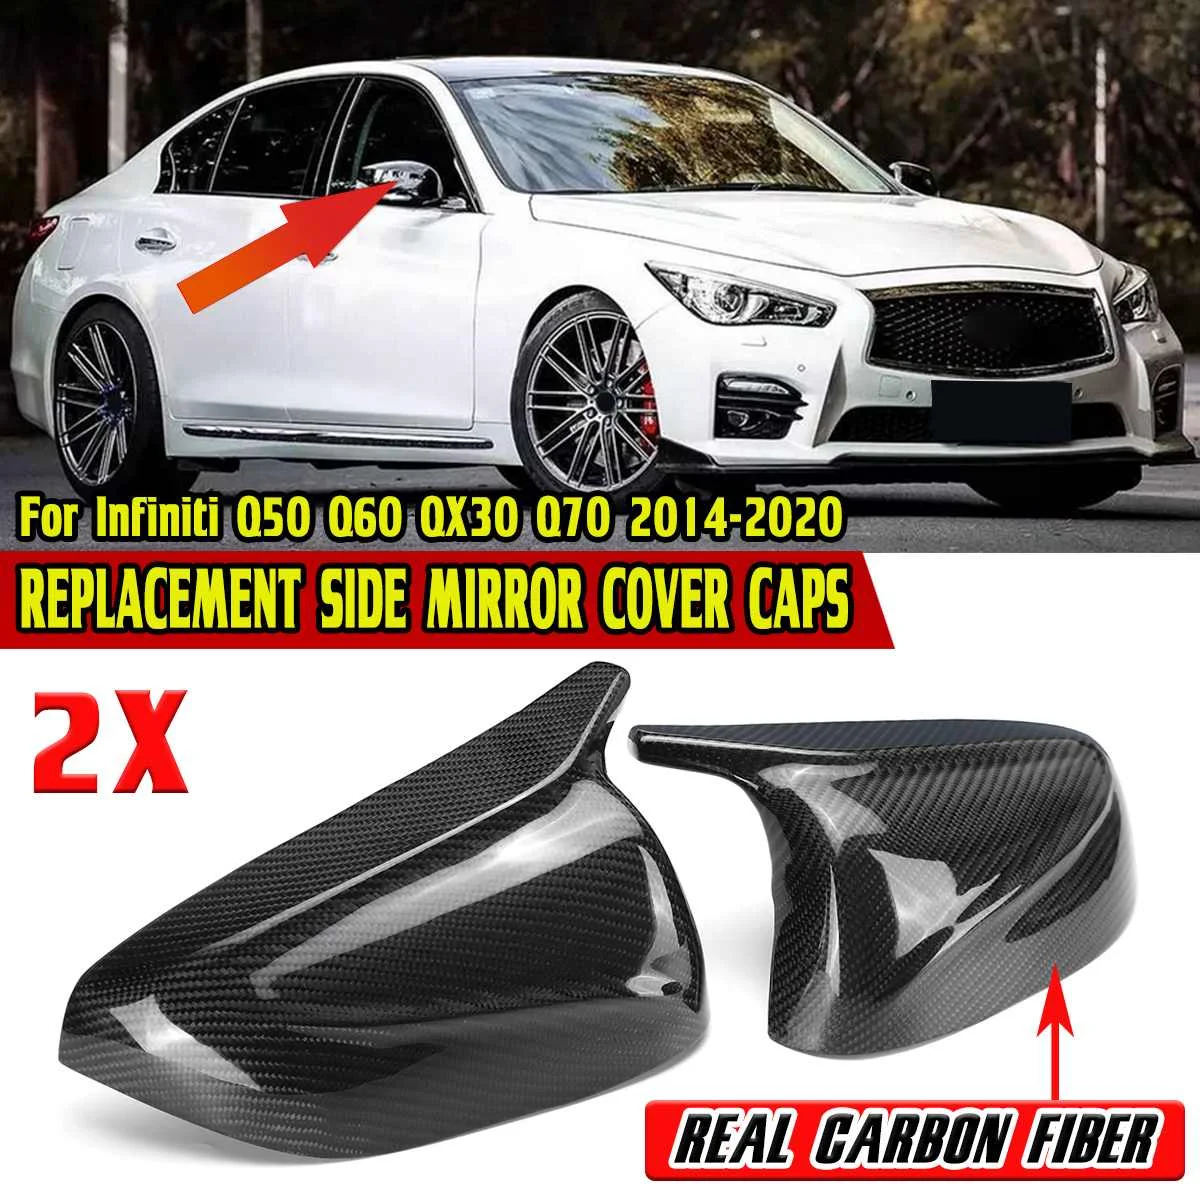 New M Style 2x Car Side Mirror Cover Cap Replacement Car Rearview Mirror Shell Case For Infiniti Q50 Q60 QX30 Q70 2014-2021